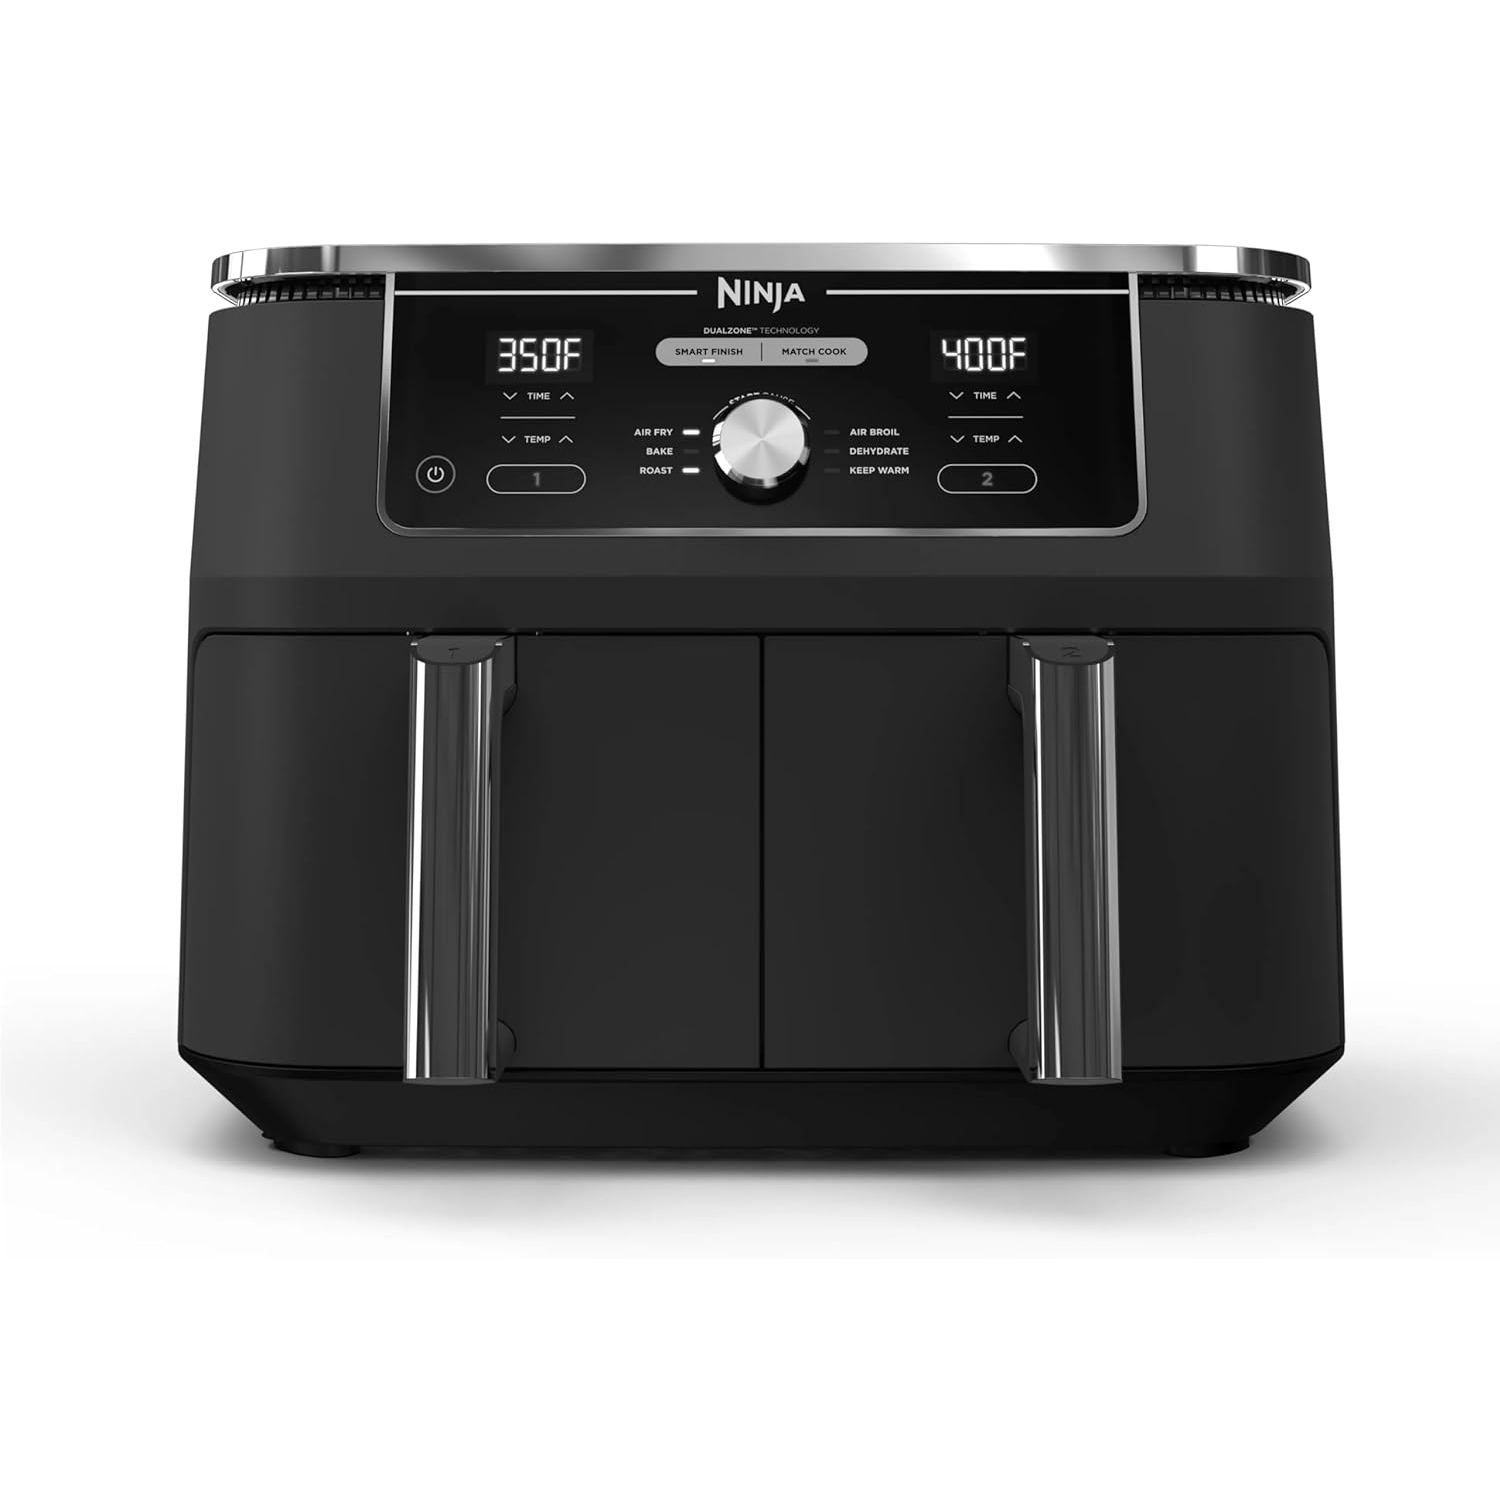 Open Box - Ninja Foodi 10 Quart 6-in-1 DualZone XL 2-Basket Air Fryer with 2 Independent Frying Baskets, Match Cook & Smart Finish to Roast, Broil, Dehydrate & More